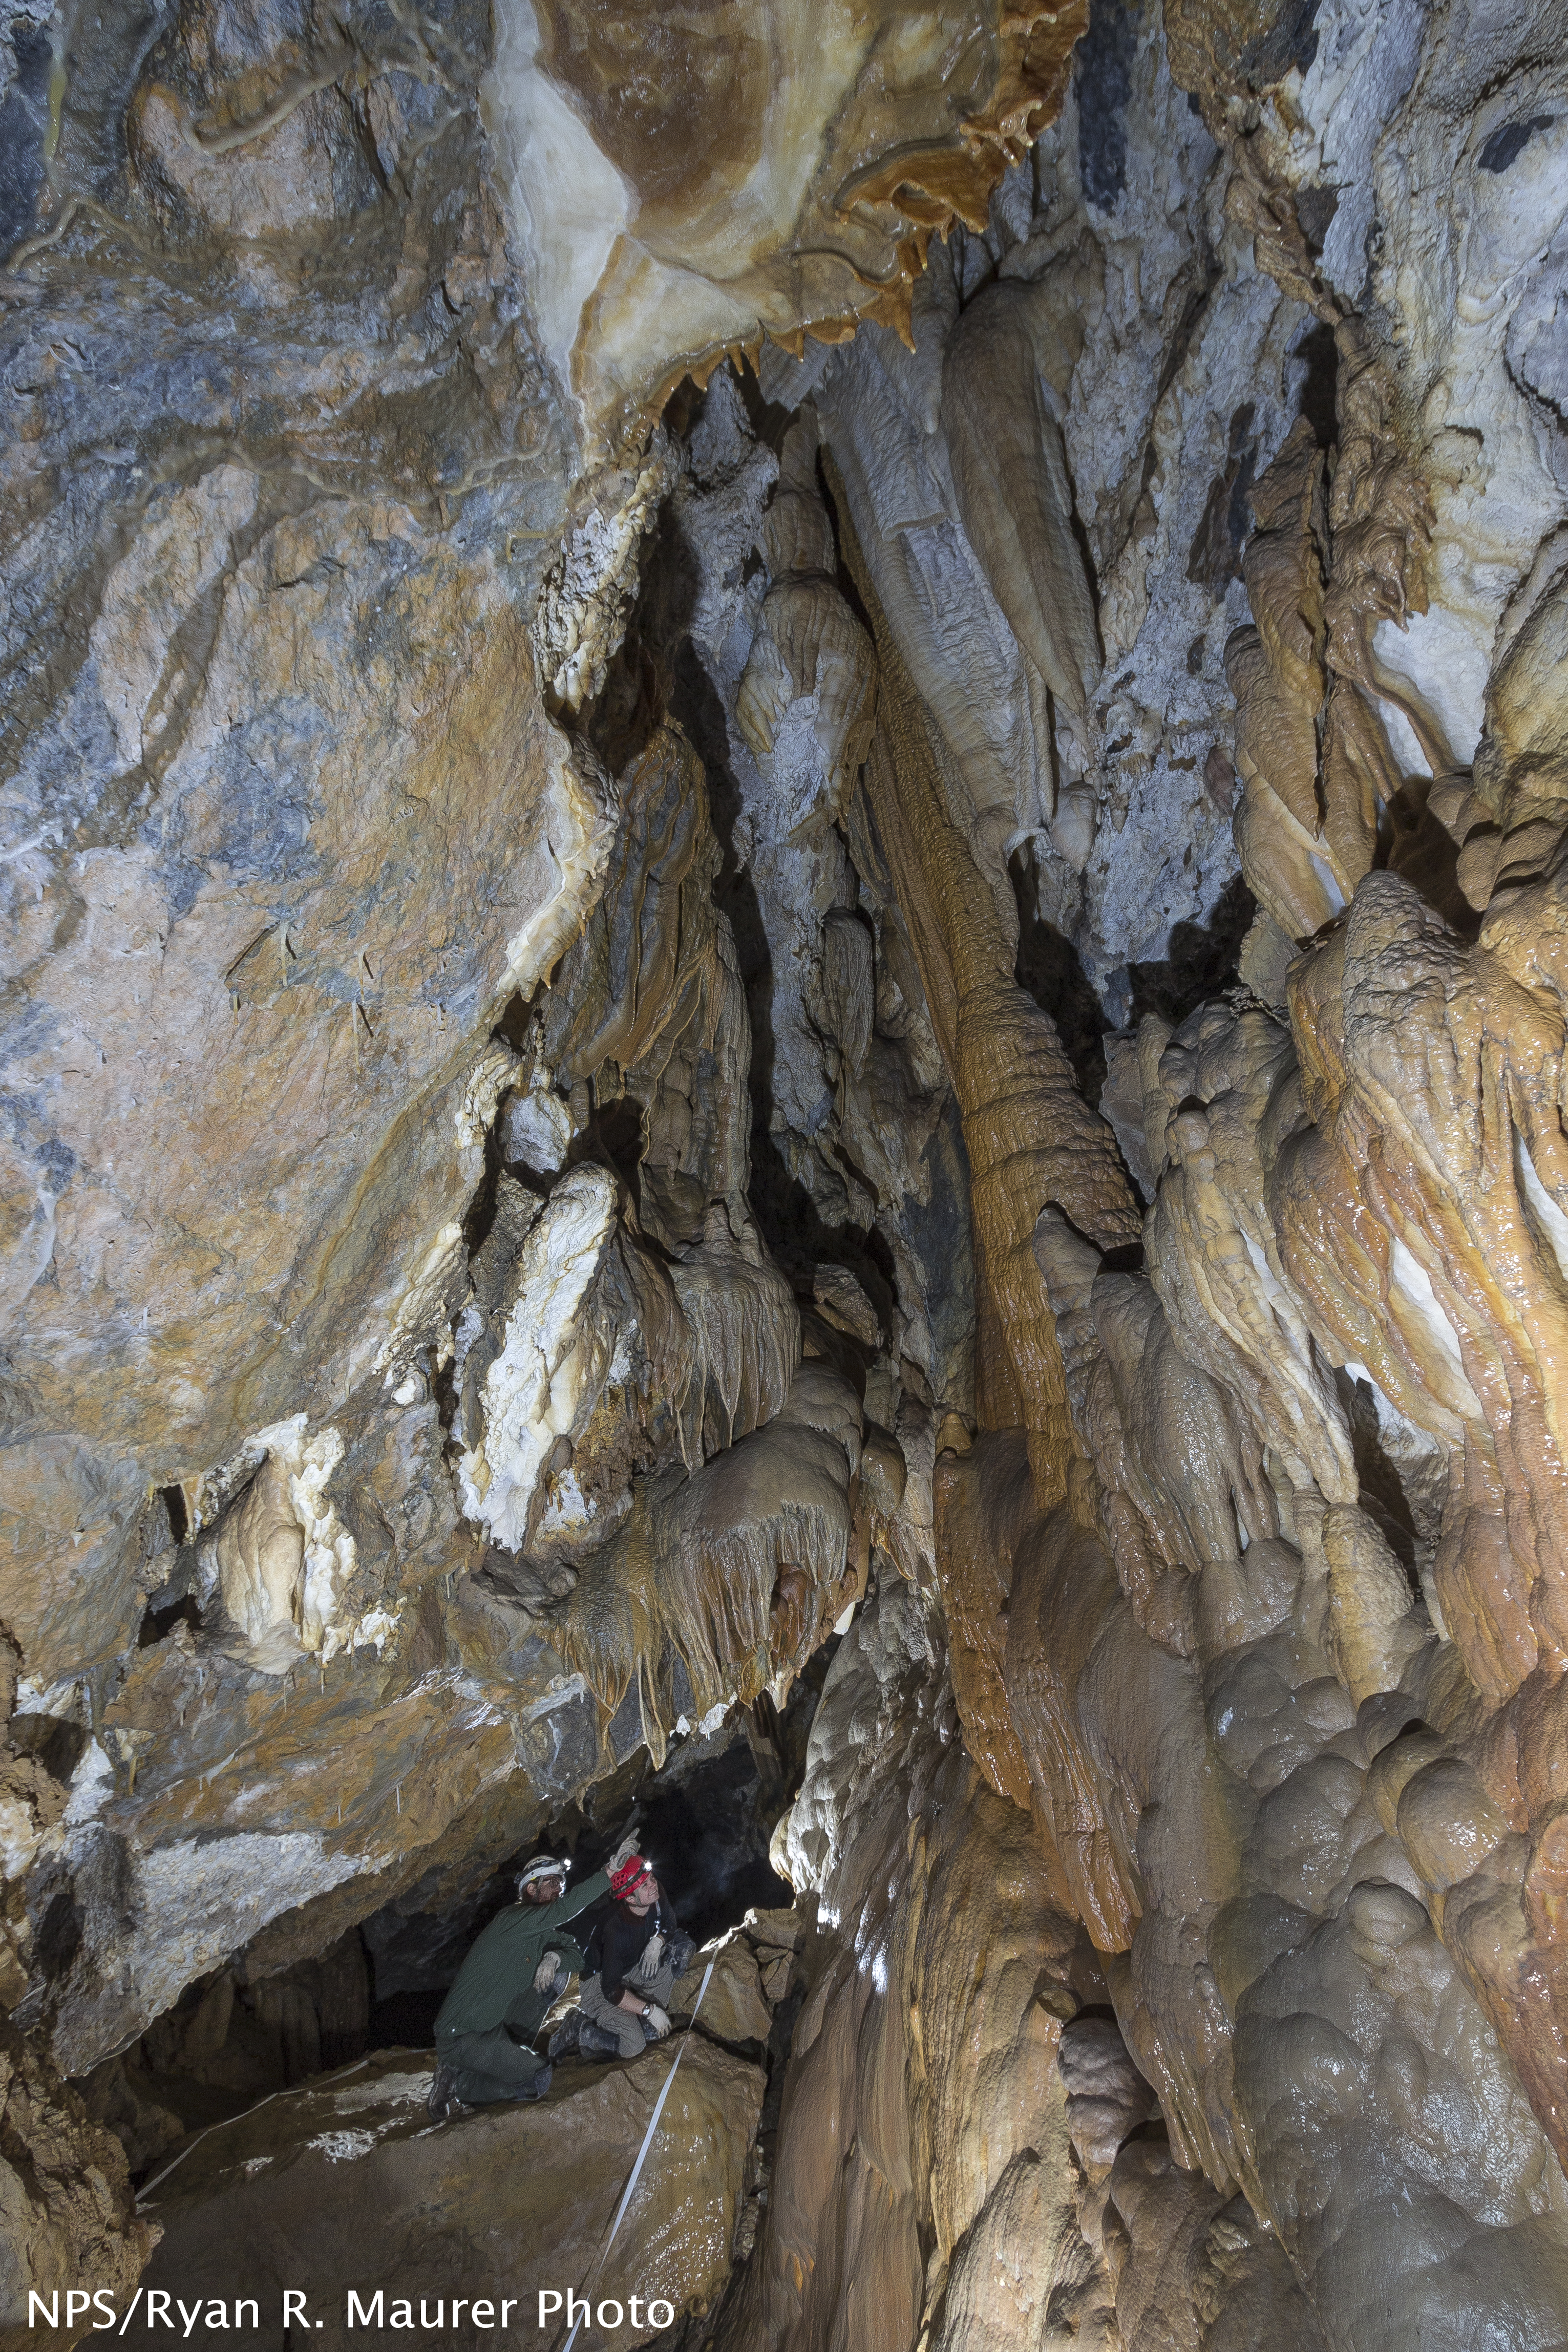 Two cavers look at large formations in Hansen Cave